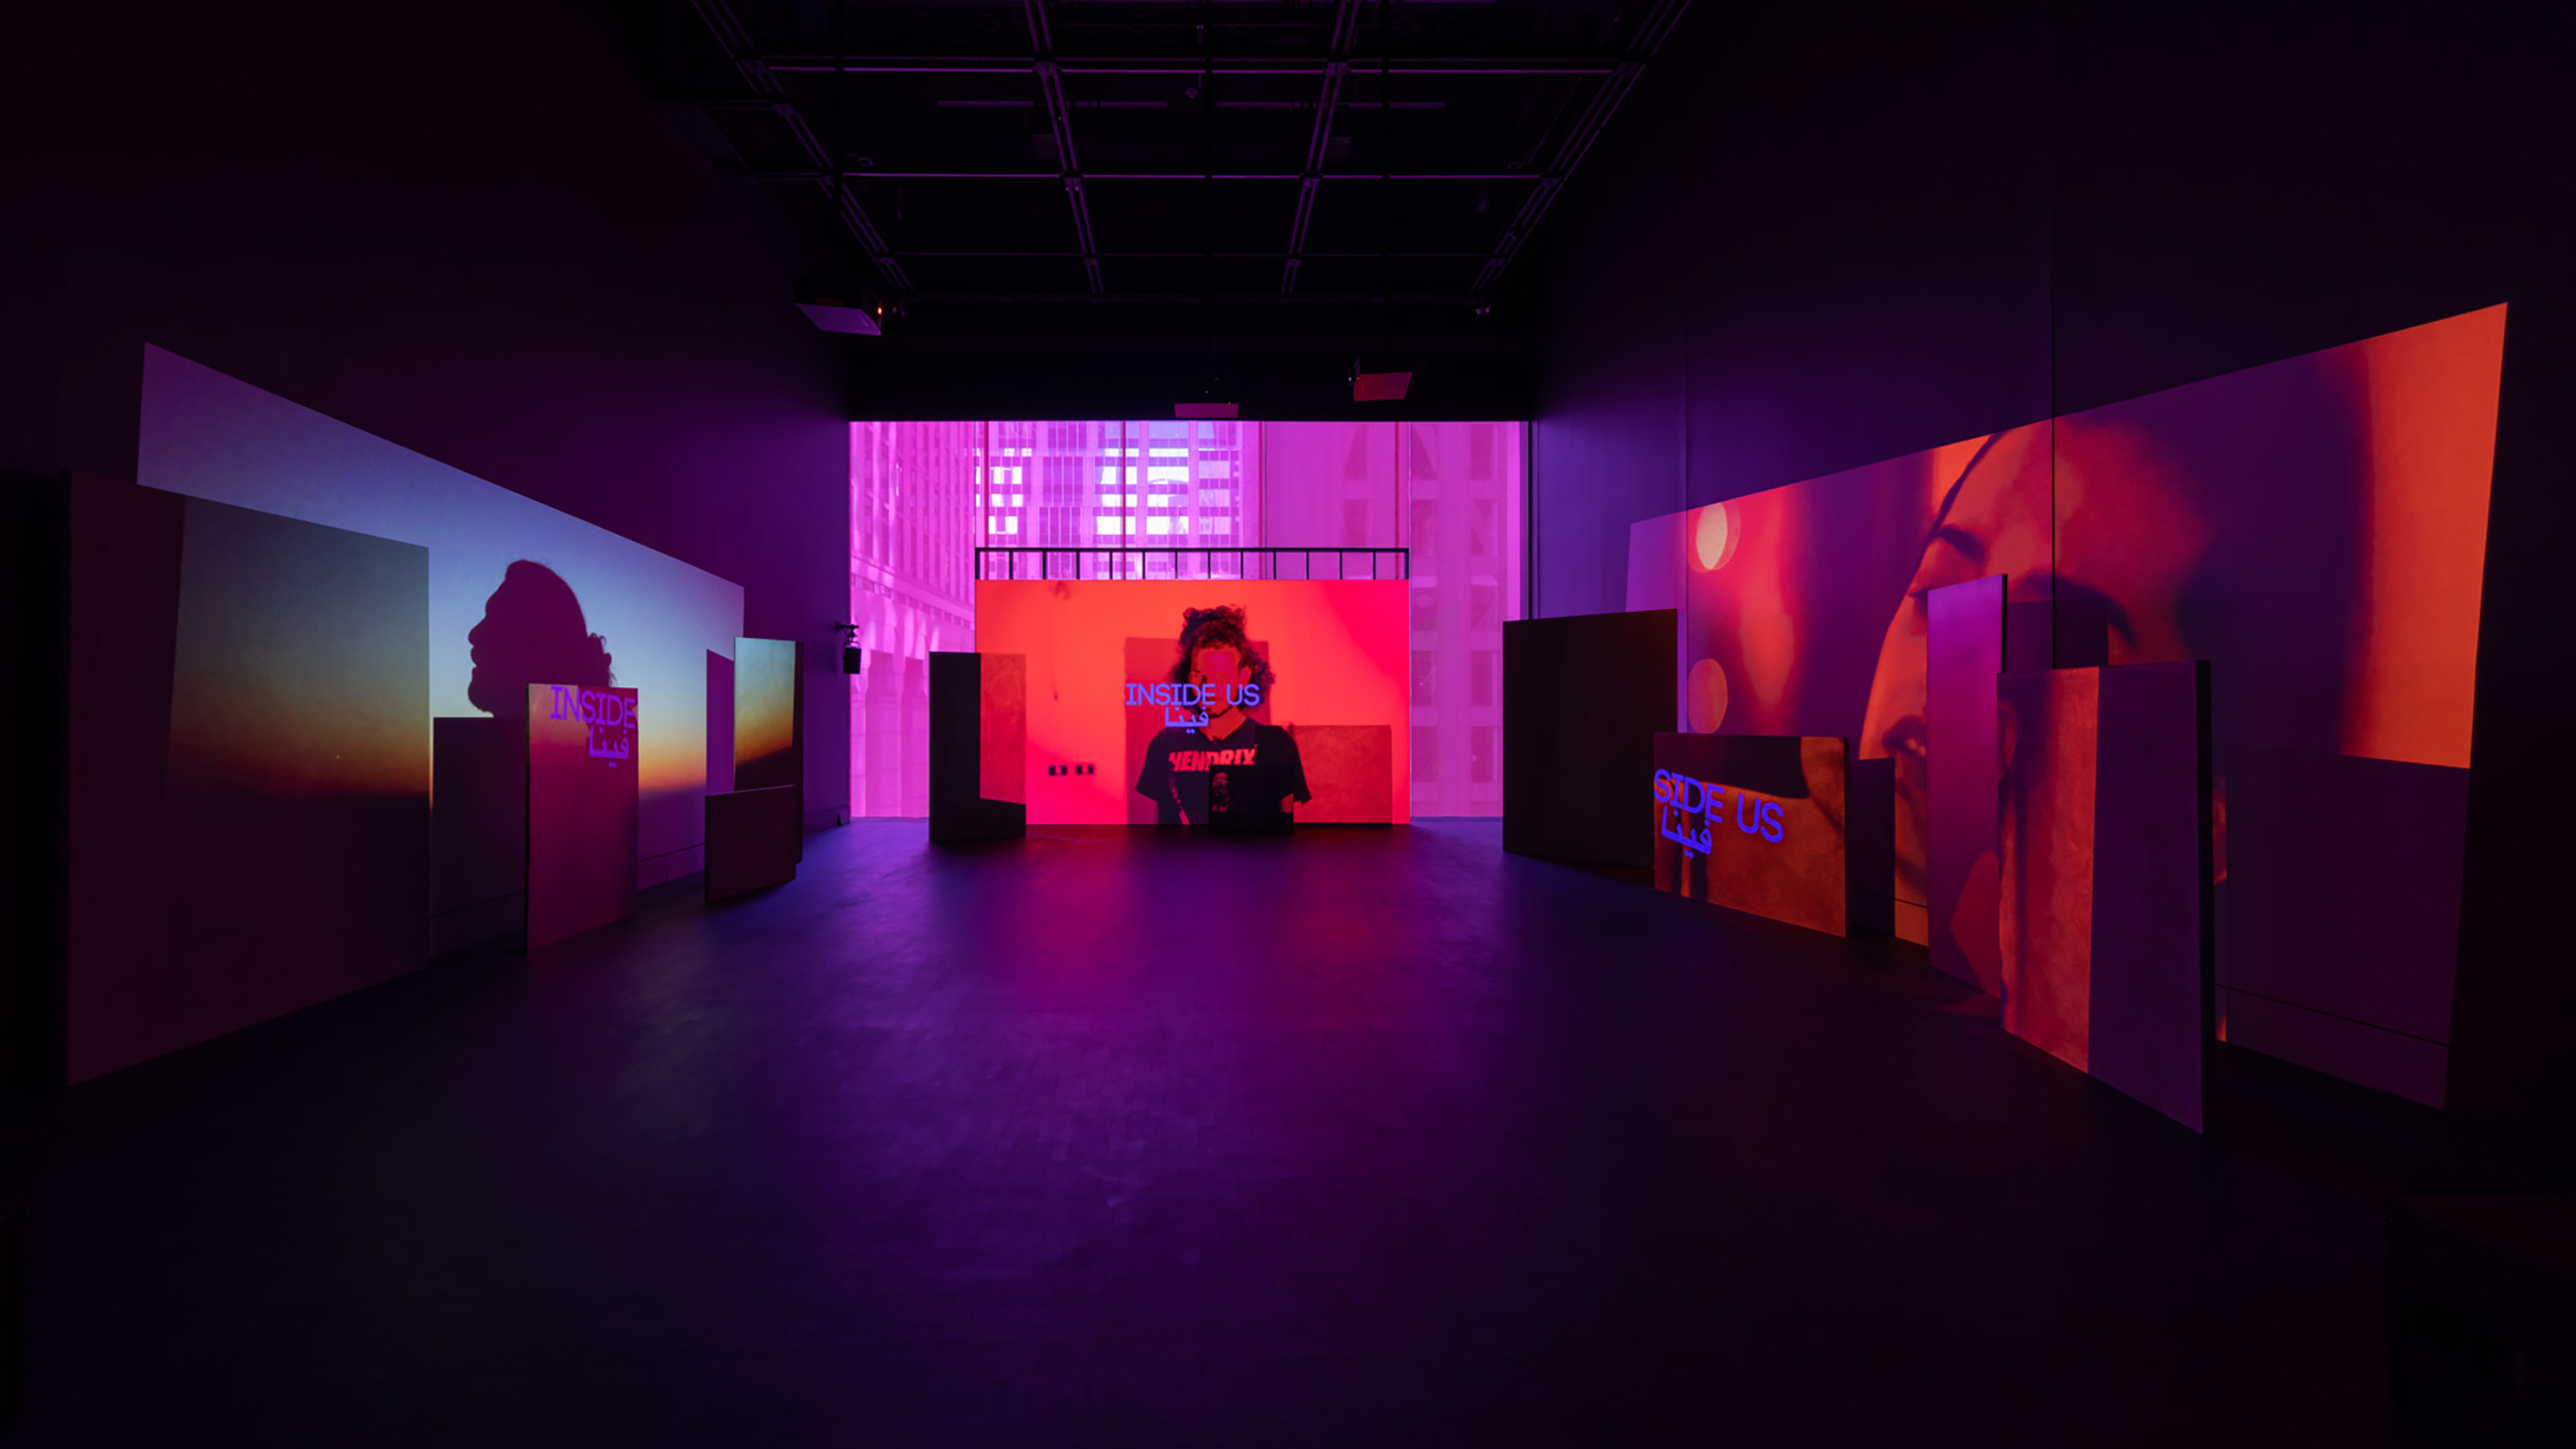 A dark gallery space with colorful images including people's faces projected onto the walls and purple text reading "Inside Us" in English and Arabic.